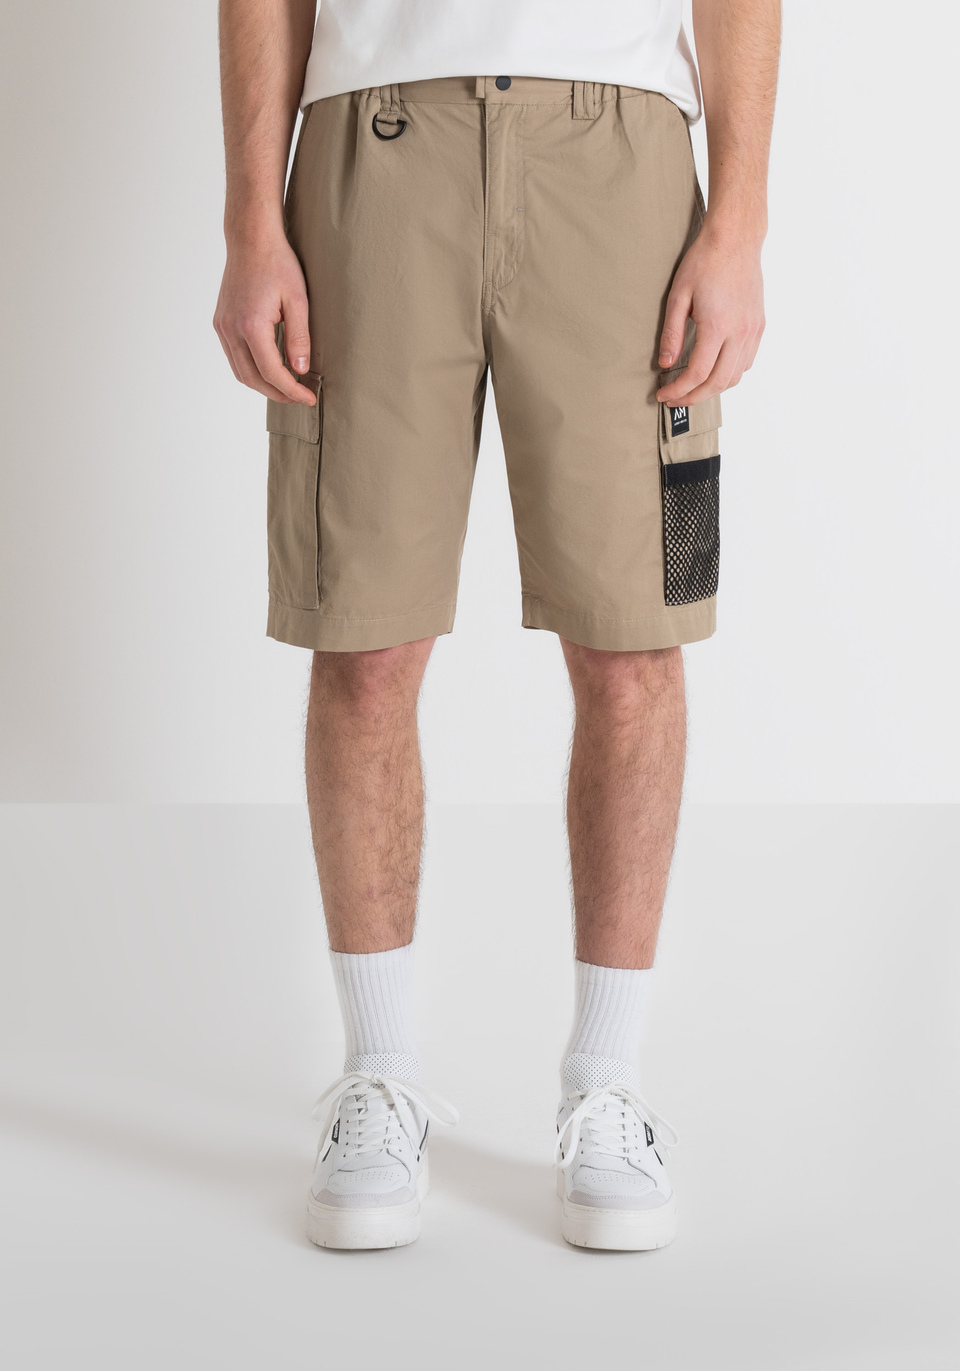 REGULAR FIT COTTON TWILL SHORTS WITH LOGO PATCH - Antony Morato Online Shop